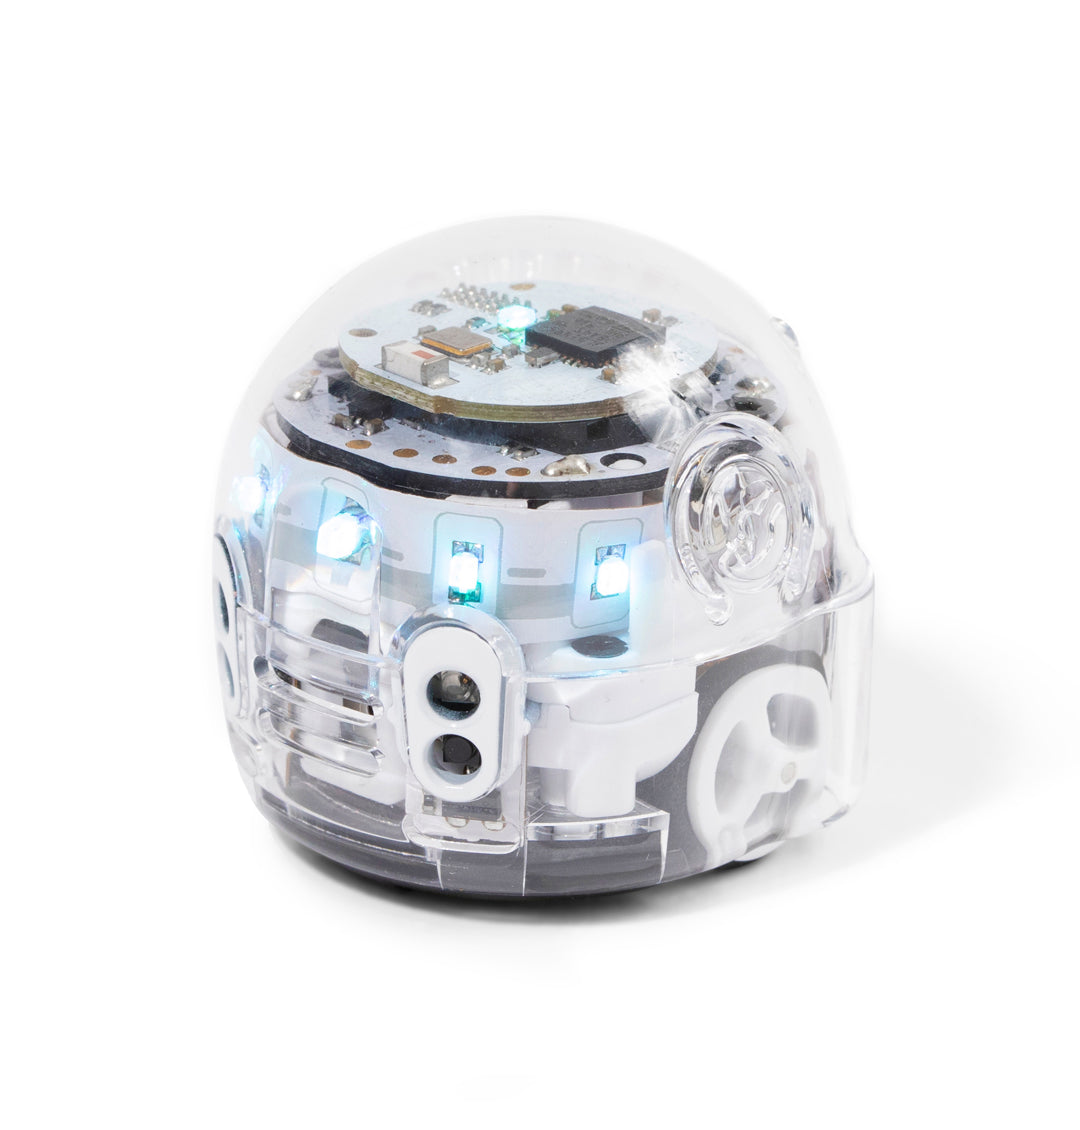 Ozobot Evo Classroom Kit (18 Bots) now available in Australia from Sammat Education